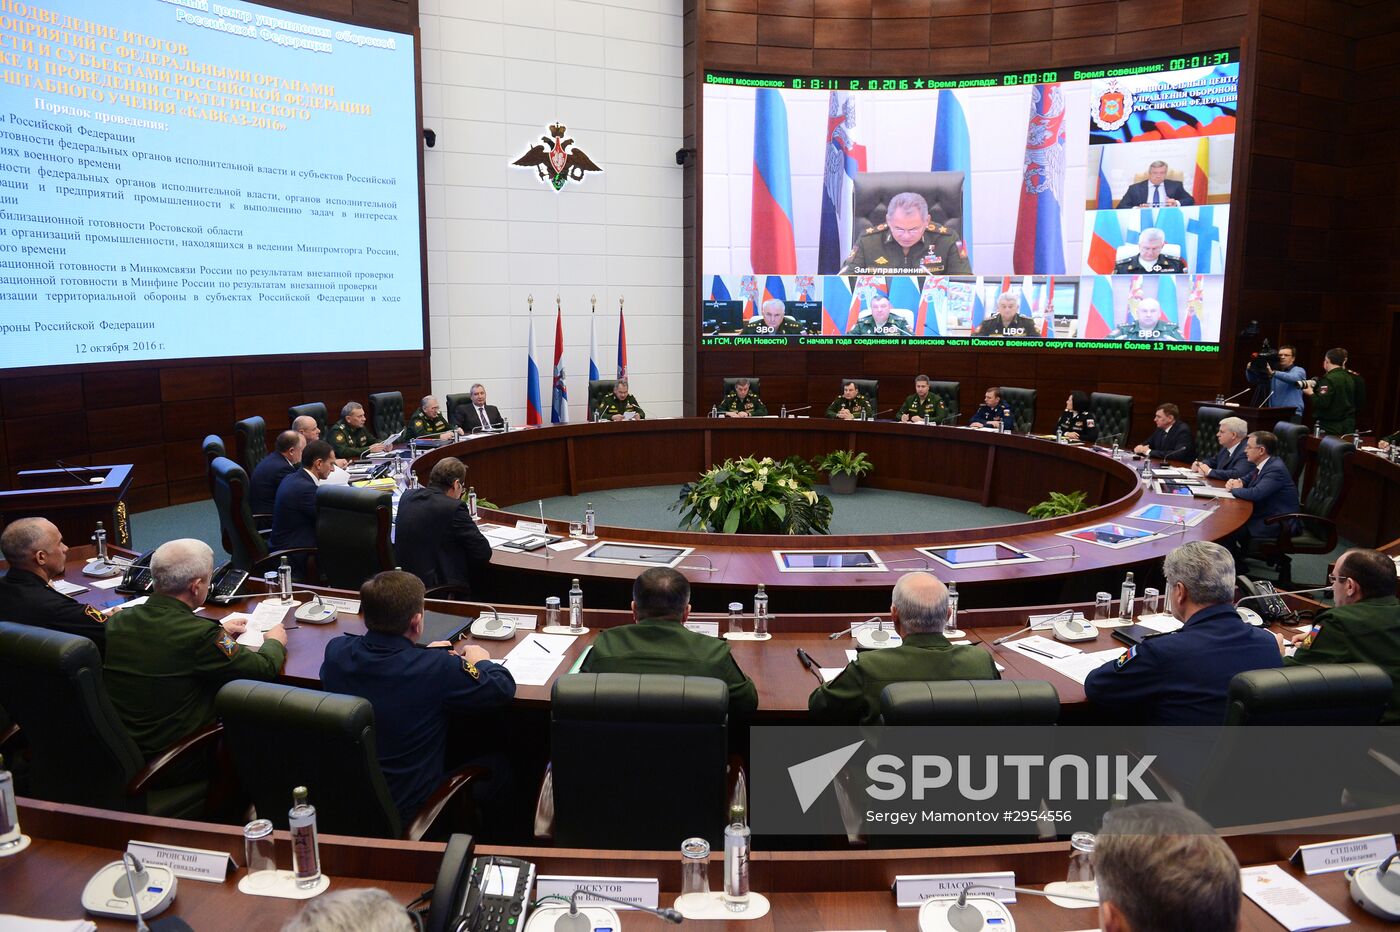 Meeting on the results of Caucasus - 2016 military drills